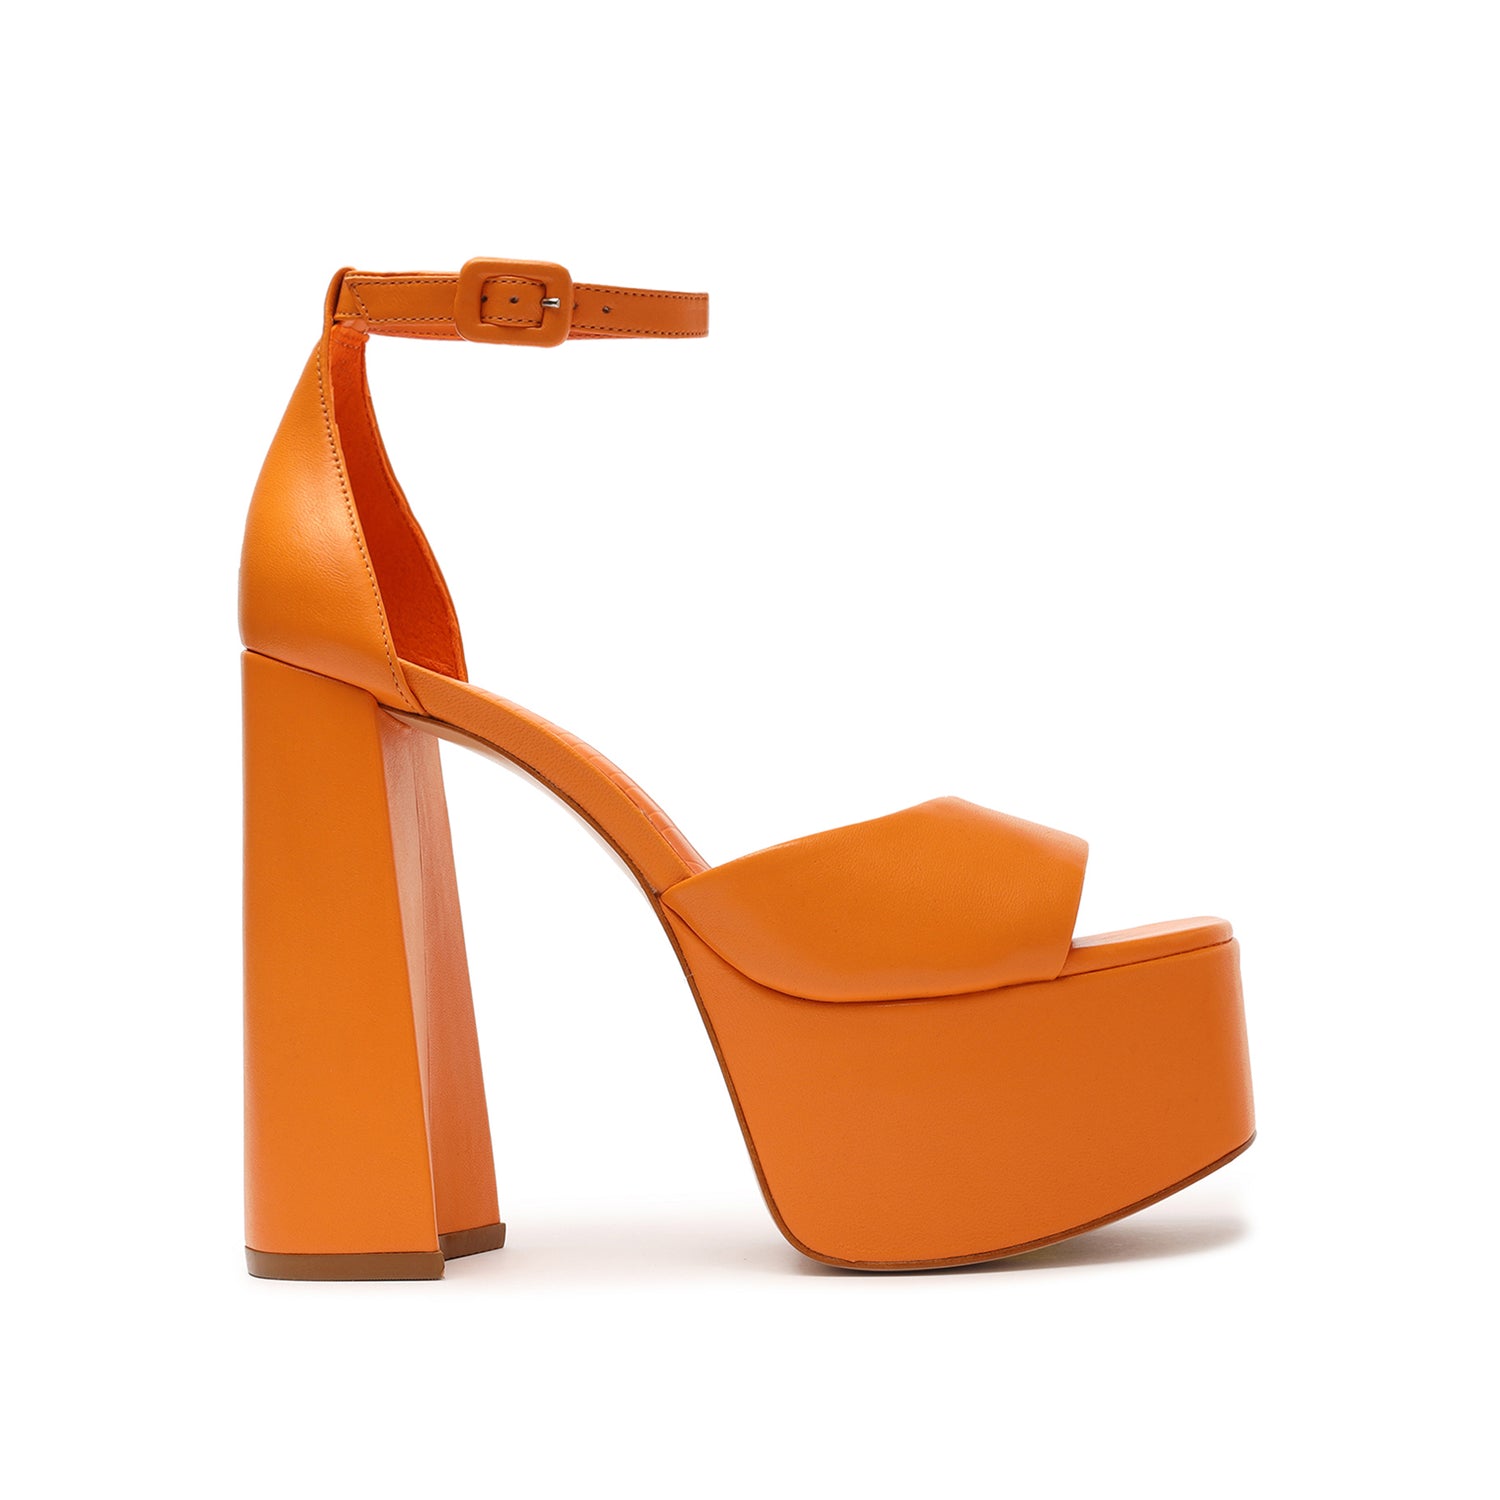 Lenne Nappa Leather Sandal Sandals Sale 5 Bright Tangerine Nappa Leather - Schutz Shoes